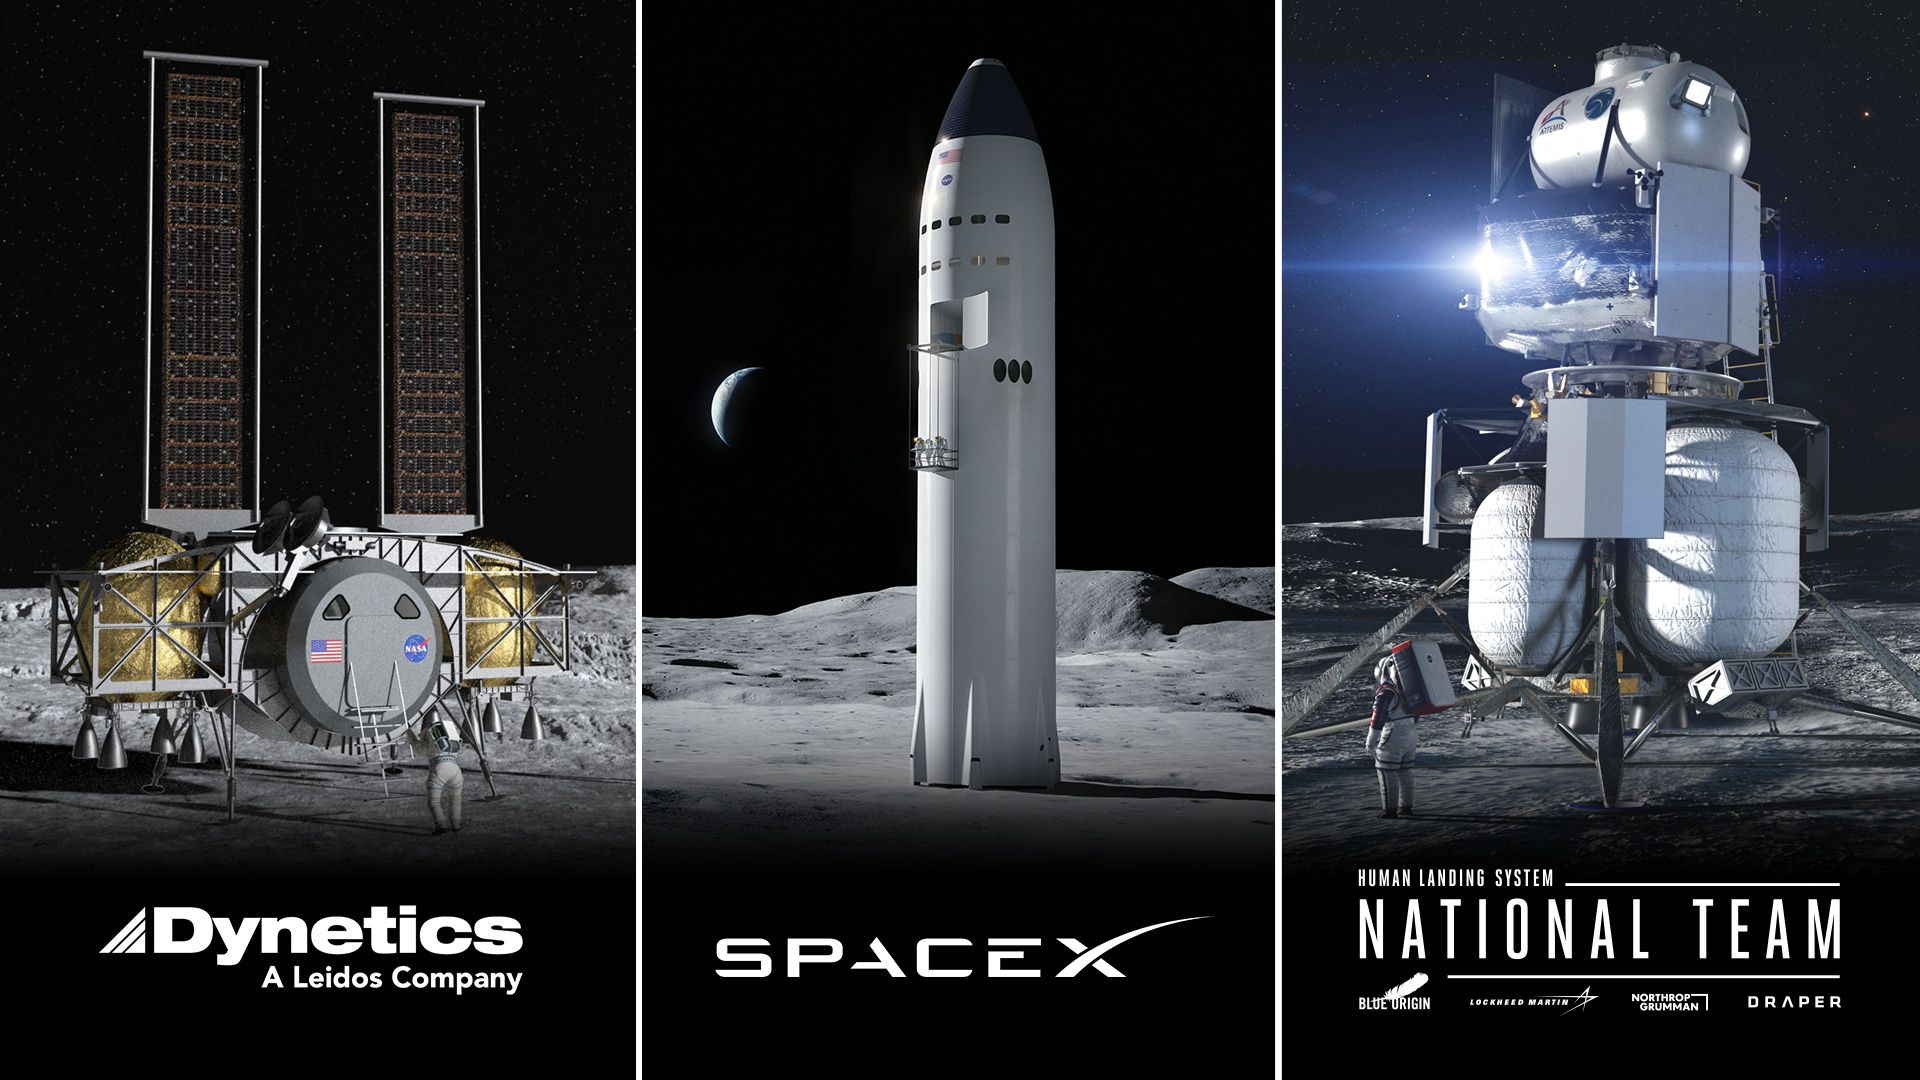 NASA wants private moon landers from 3 companies. Here's how they'll work